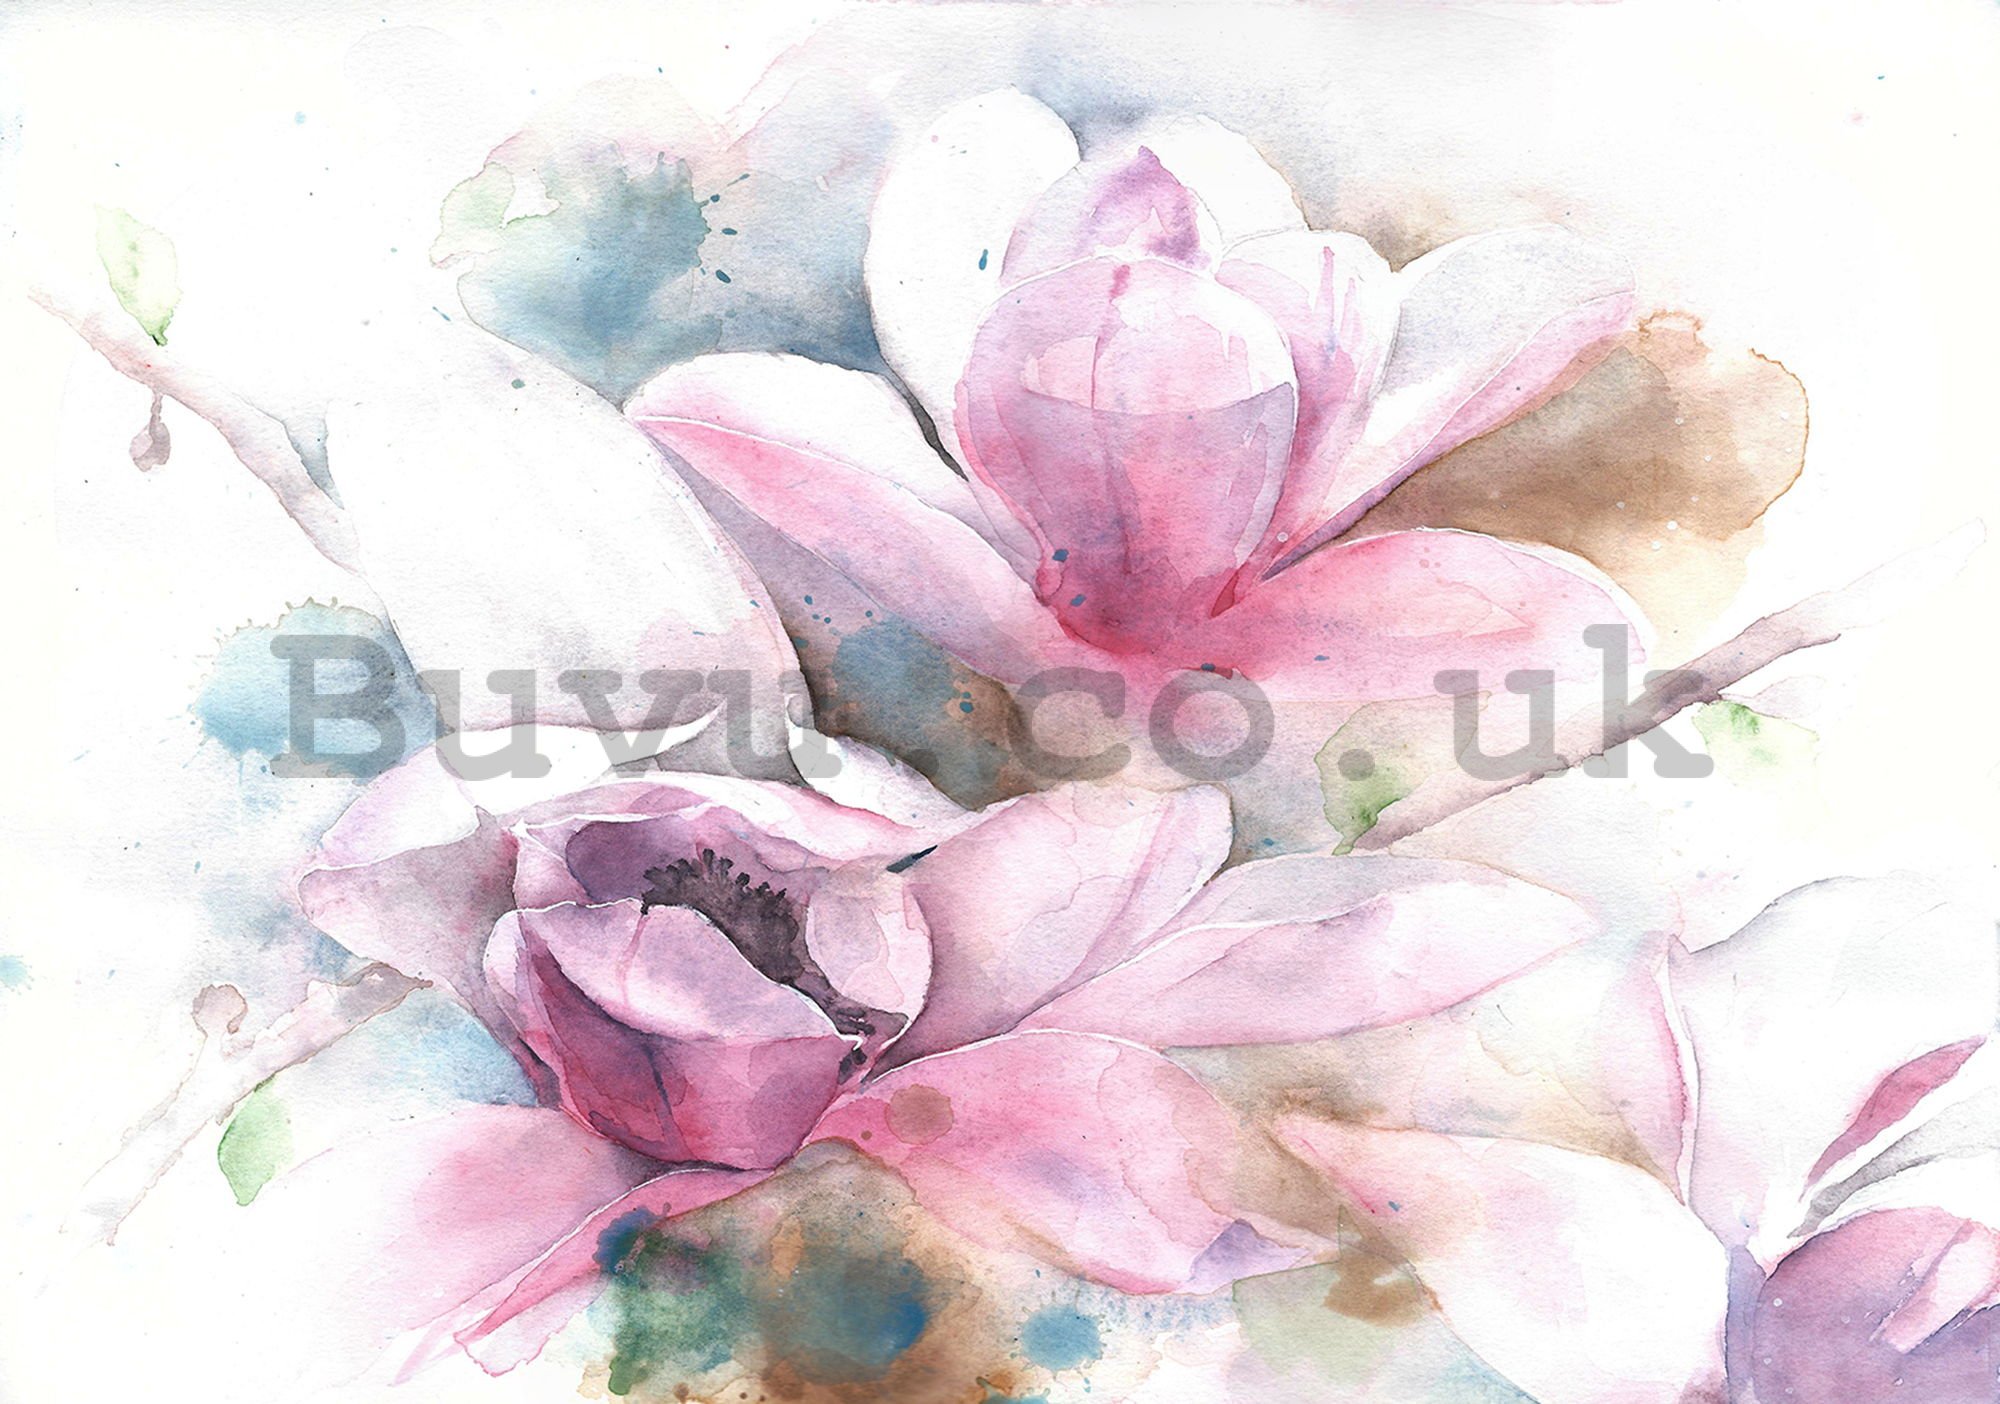 Wall mural: Magnolia (painted) - 184x254 cm